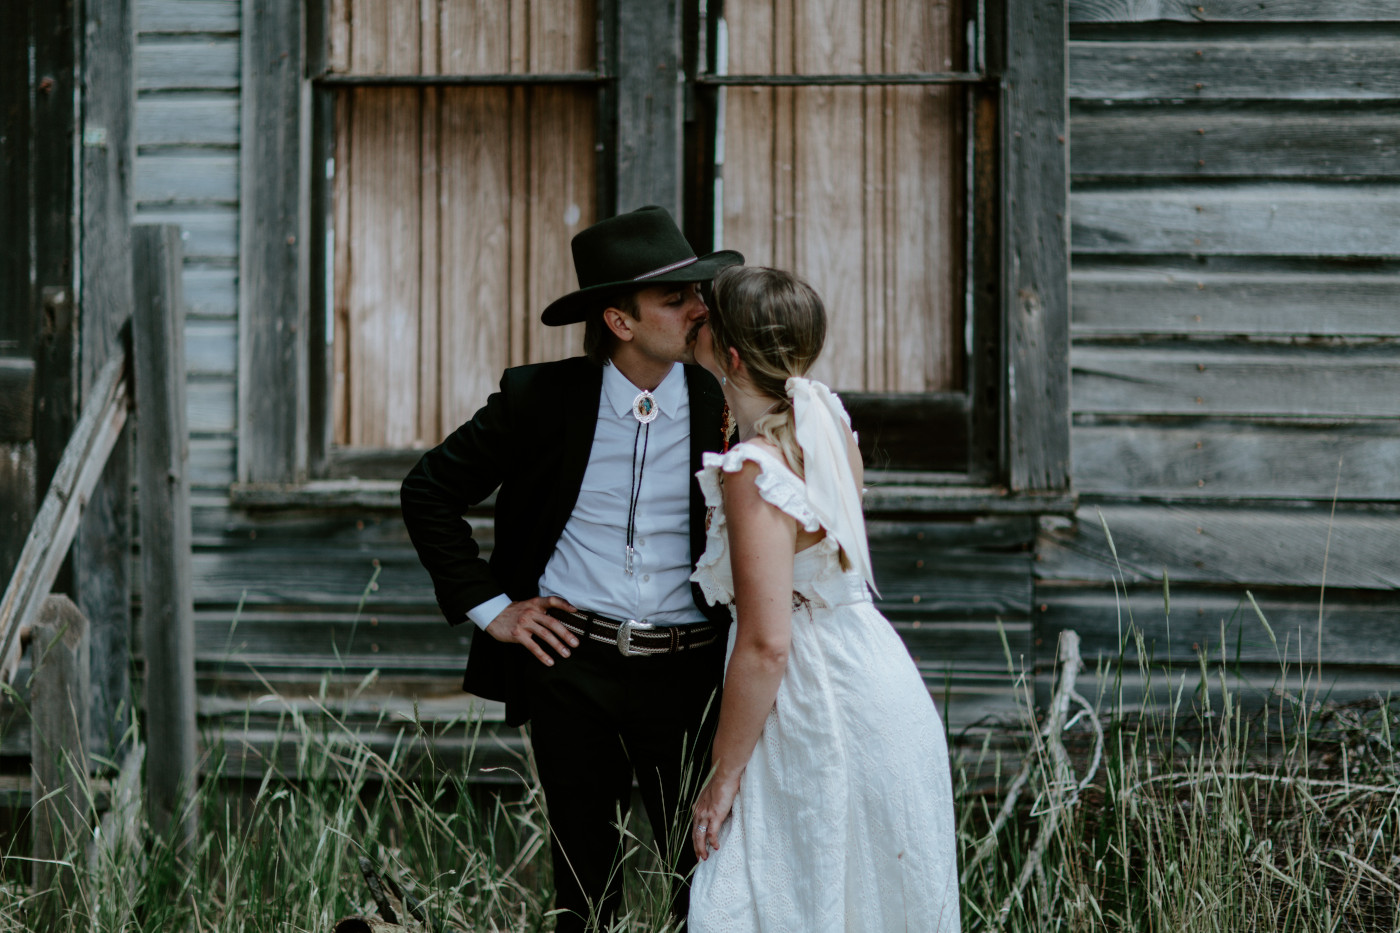 Emily and Greyson kiss. Elopement photography in the Central Oregon desert by Sienna Plus Josh.